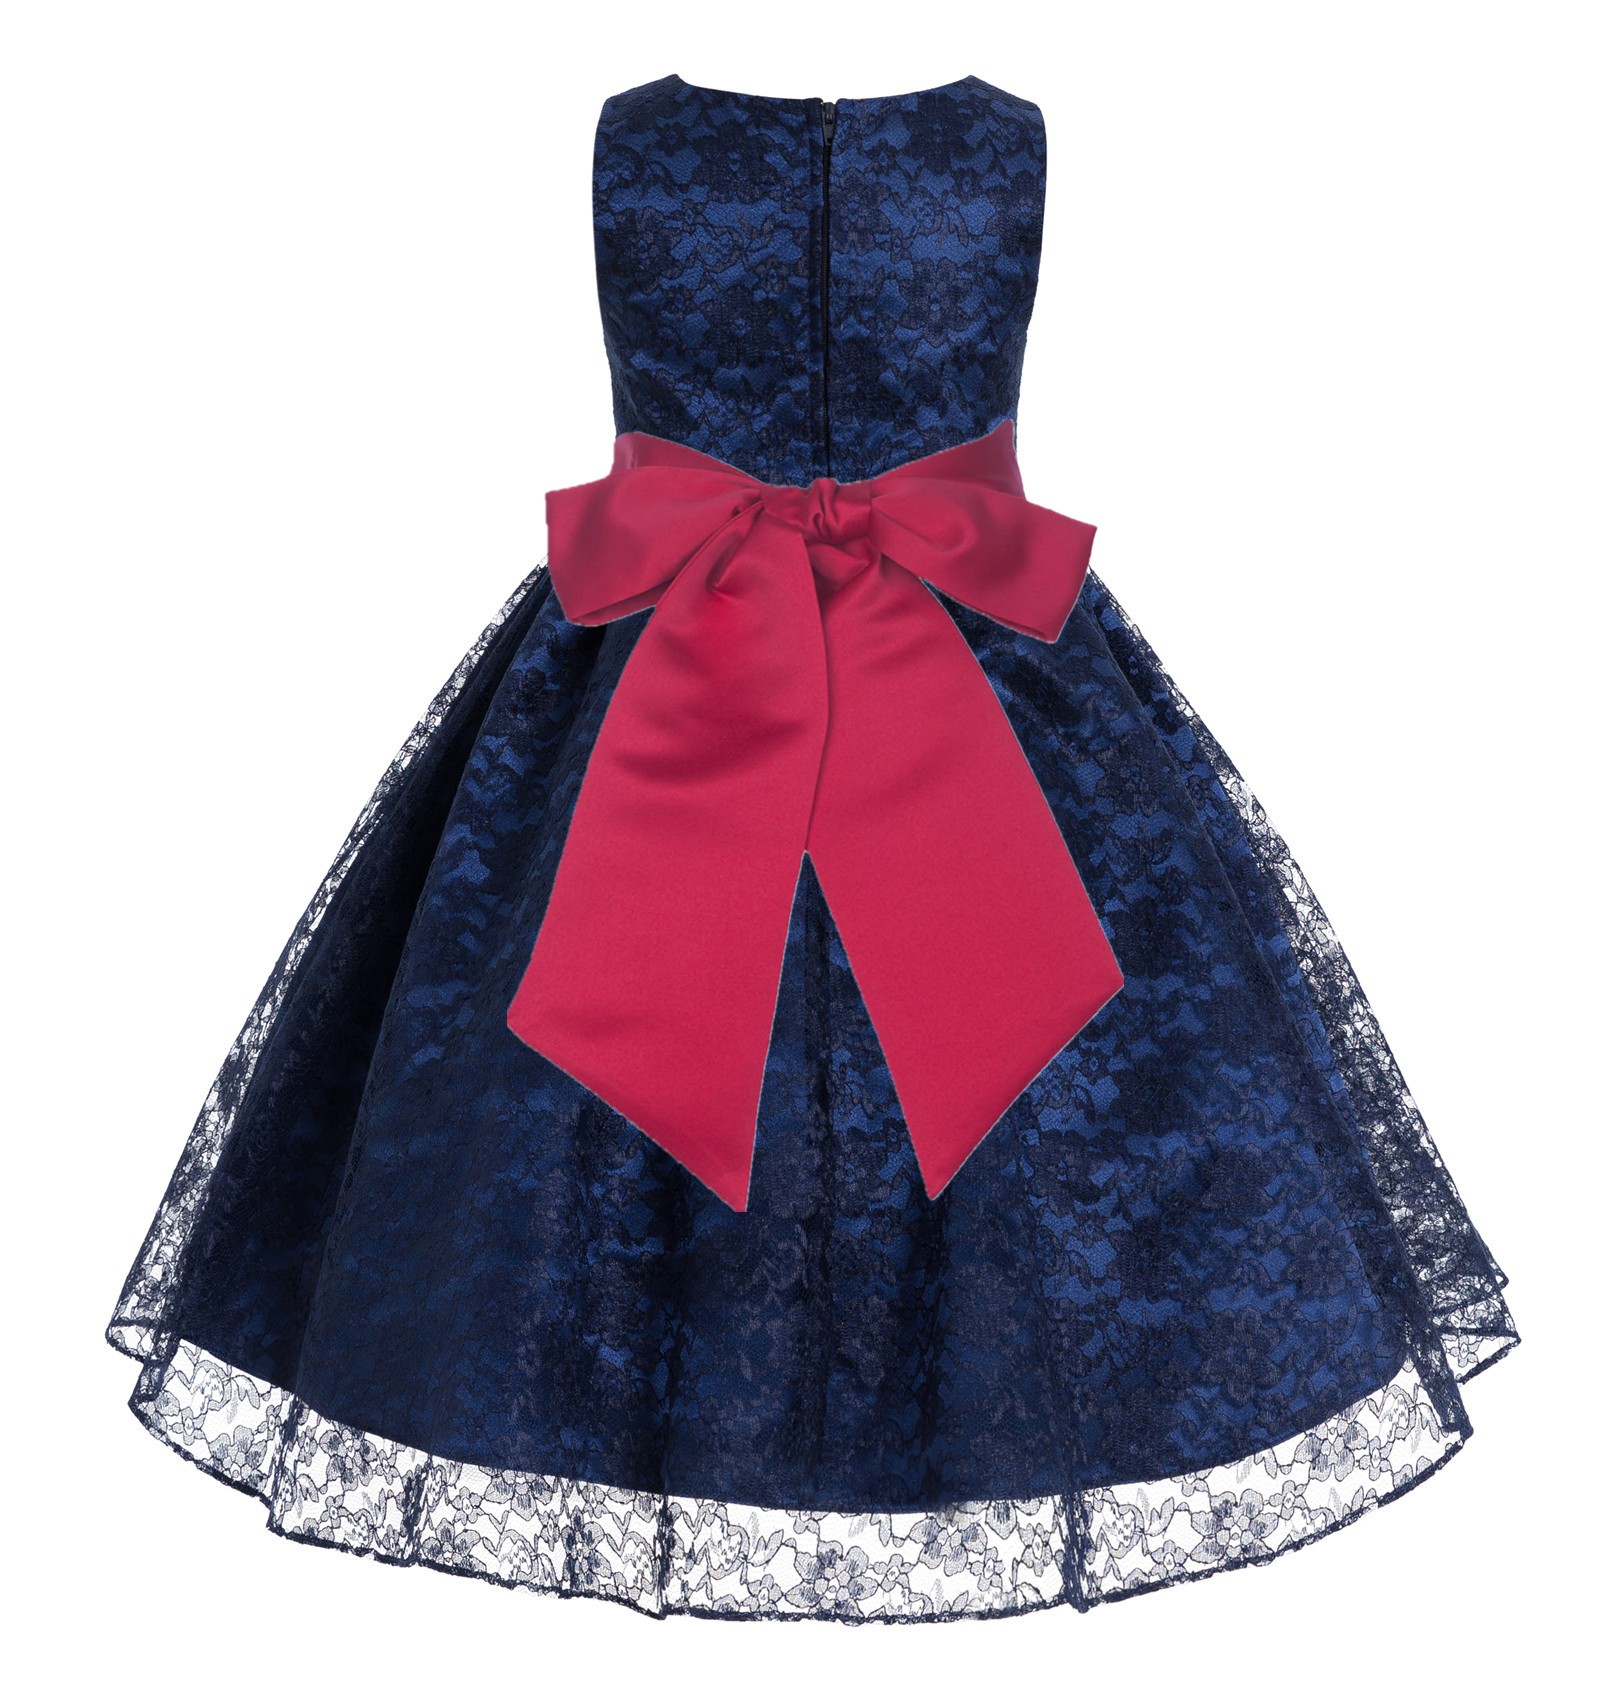 Navy / Cherry Floral Lace Overlay Flower Girl Dress Lace Dresses 163s